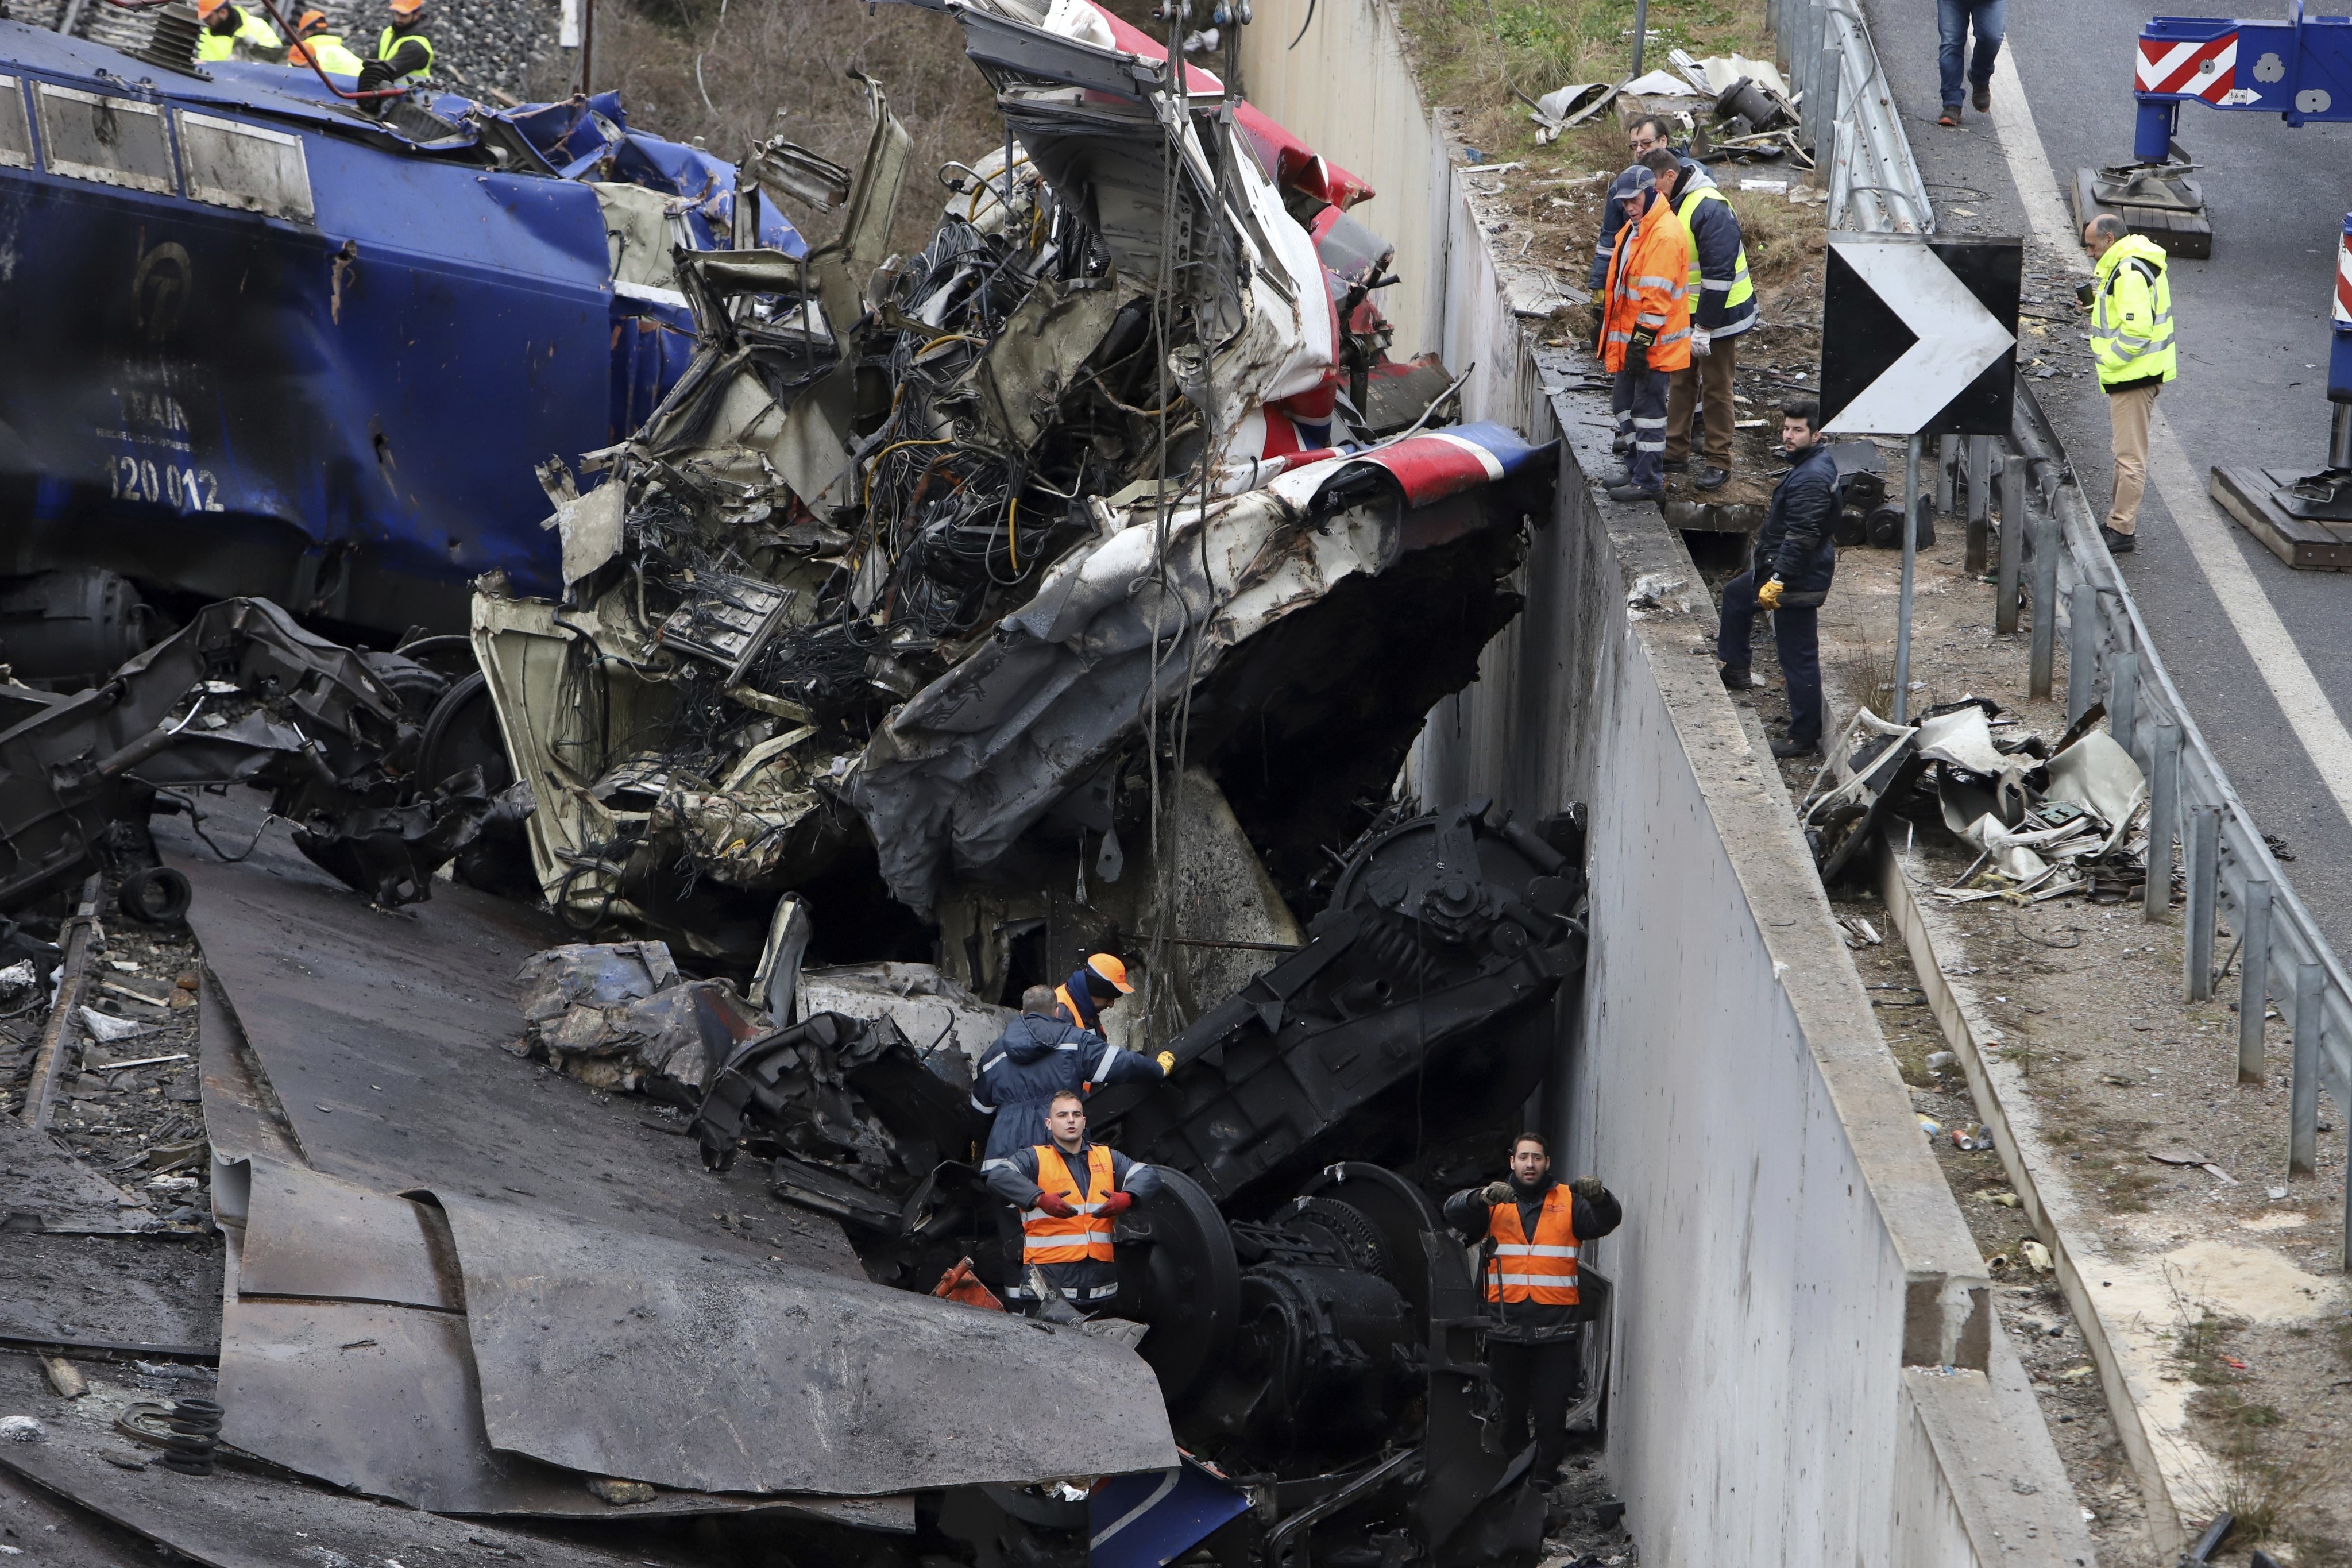 The mangled wreckage of some of the train carriages. Photo: AP